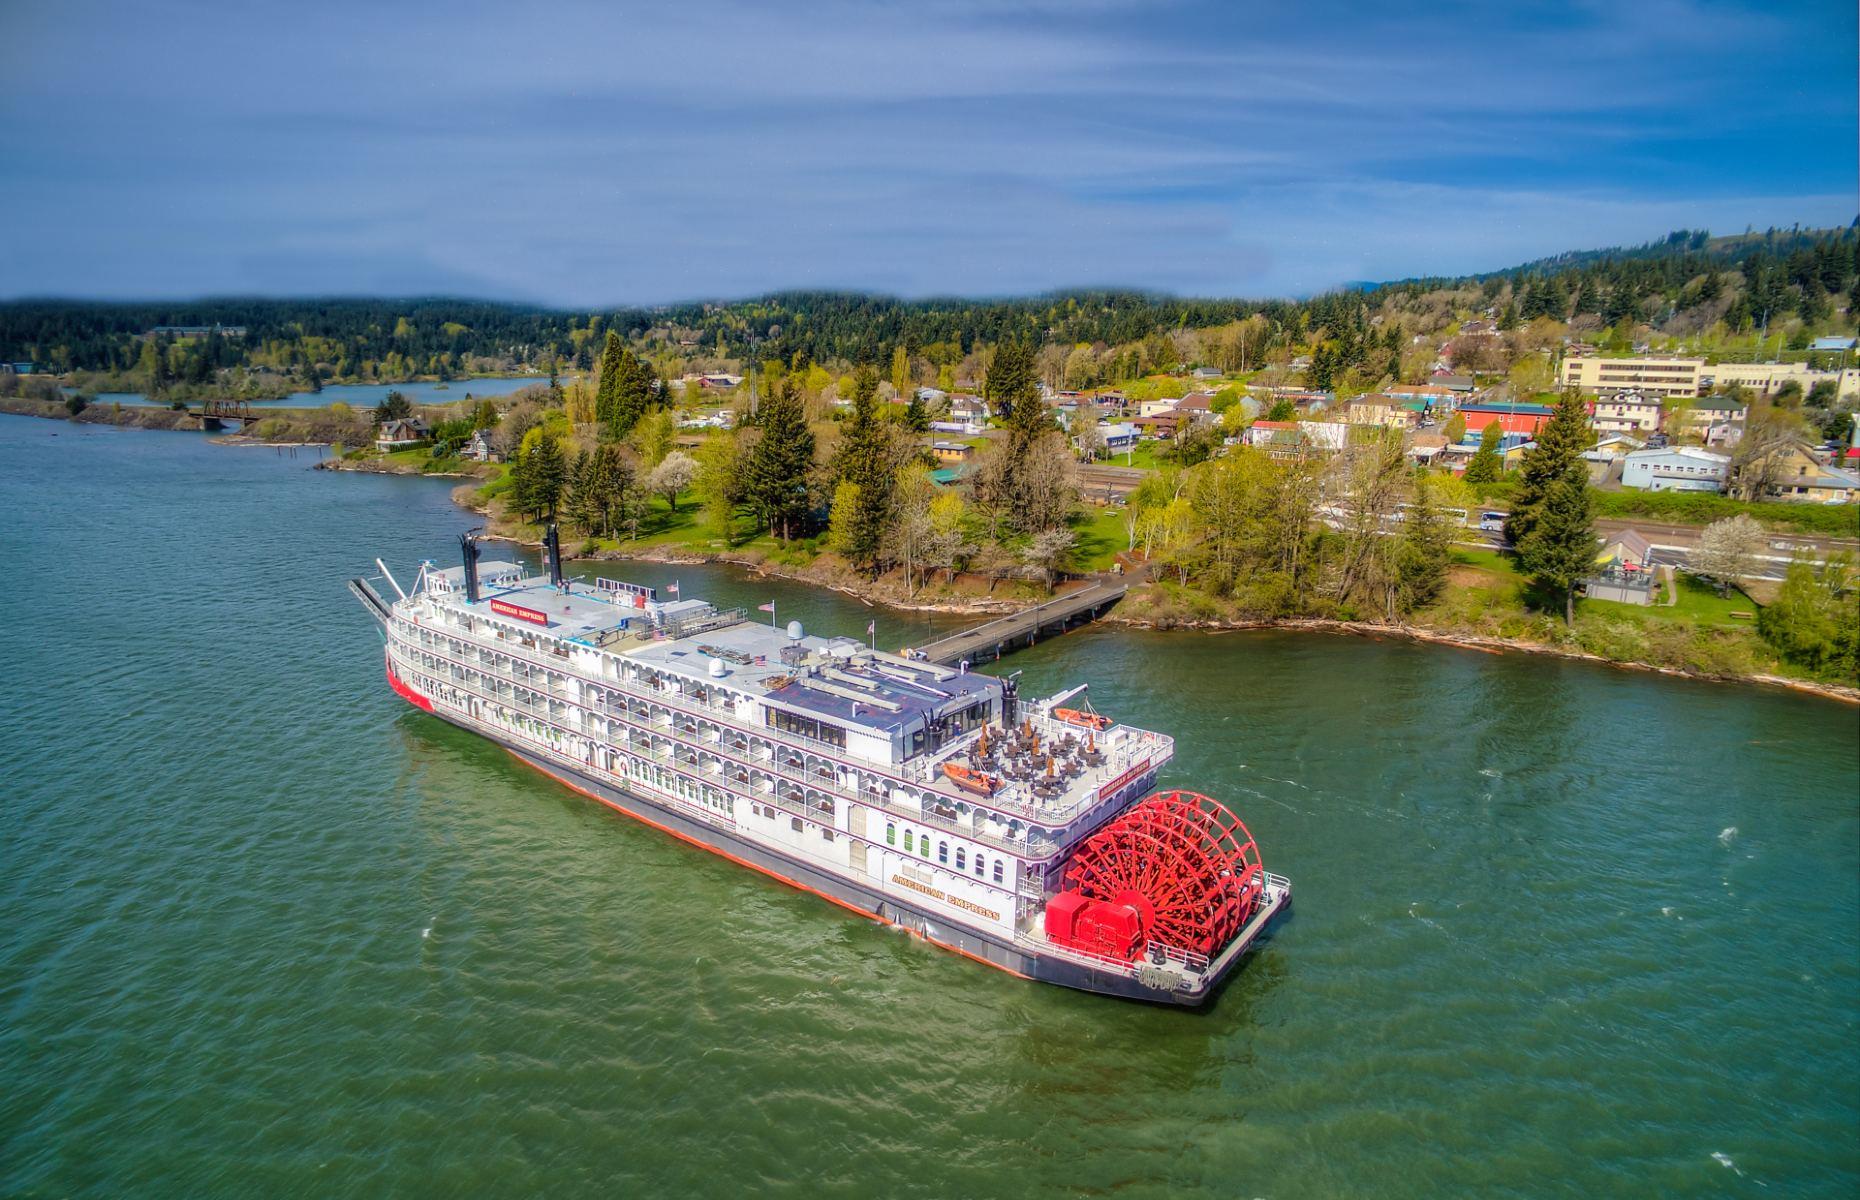 <p>A brilliant cruise for history fans, this 10-day river <a href="https://americansteamboatcruises.co.uk/project/clarkston-to-portland-10-days">Snake River and Columbia River cruise</a> starts in Clarkston and finishes in Vancouver, Washington – the route undertaken by explorers Captain Meriwether Lewis and Lieutenant William Clark in the early 1800s. It’s also a route lined with natural wonders, including Columbia Gorge, which slices through the Cascade Mountains, and Idaho’s Hell’s Canyon, which is deeper than the Grand Canyon and can be explored on a high-speed boat ride. The Columbia River stretch is where you’re most likely to see bison, elk and deer too. </p>